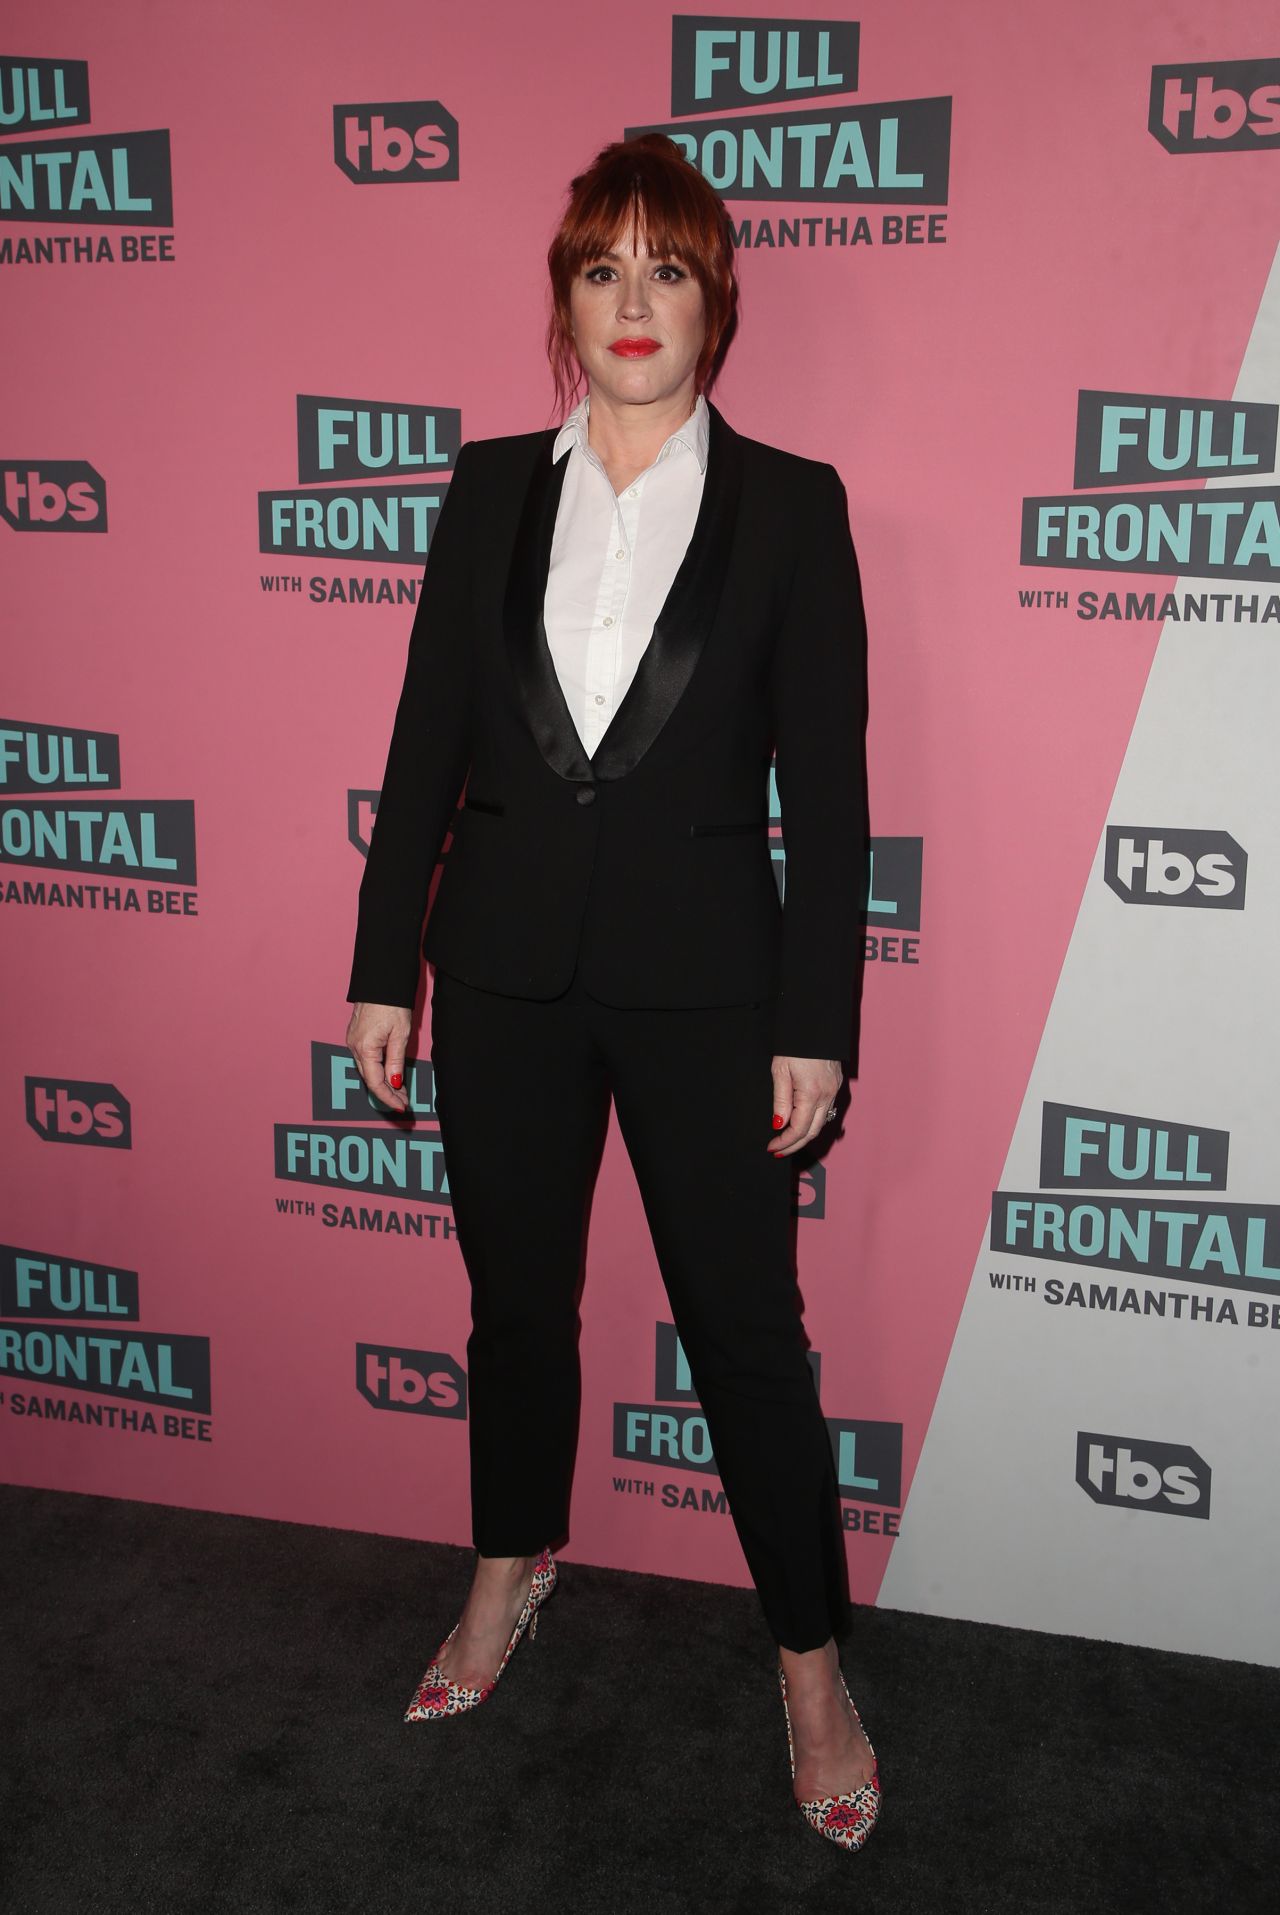 molly-ringwald-full-frontal-with-samantha-bee-fyc-event-in-beverly-hills-5.jpg